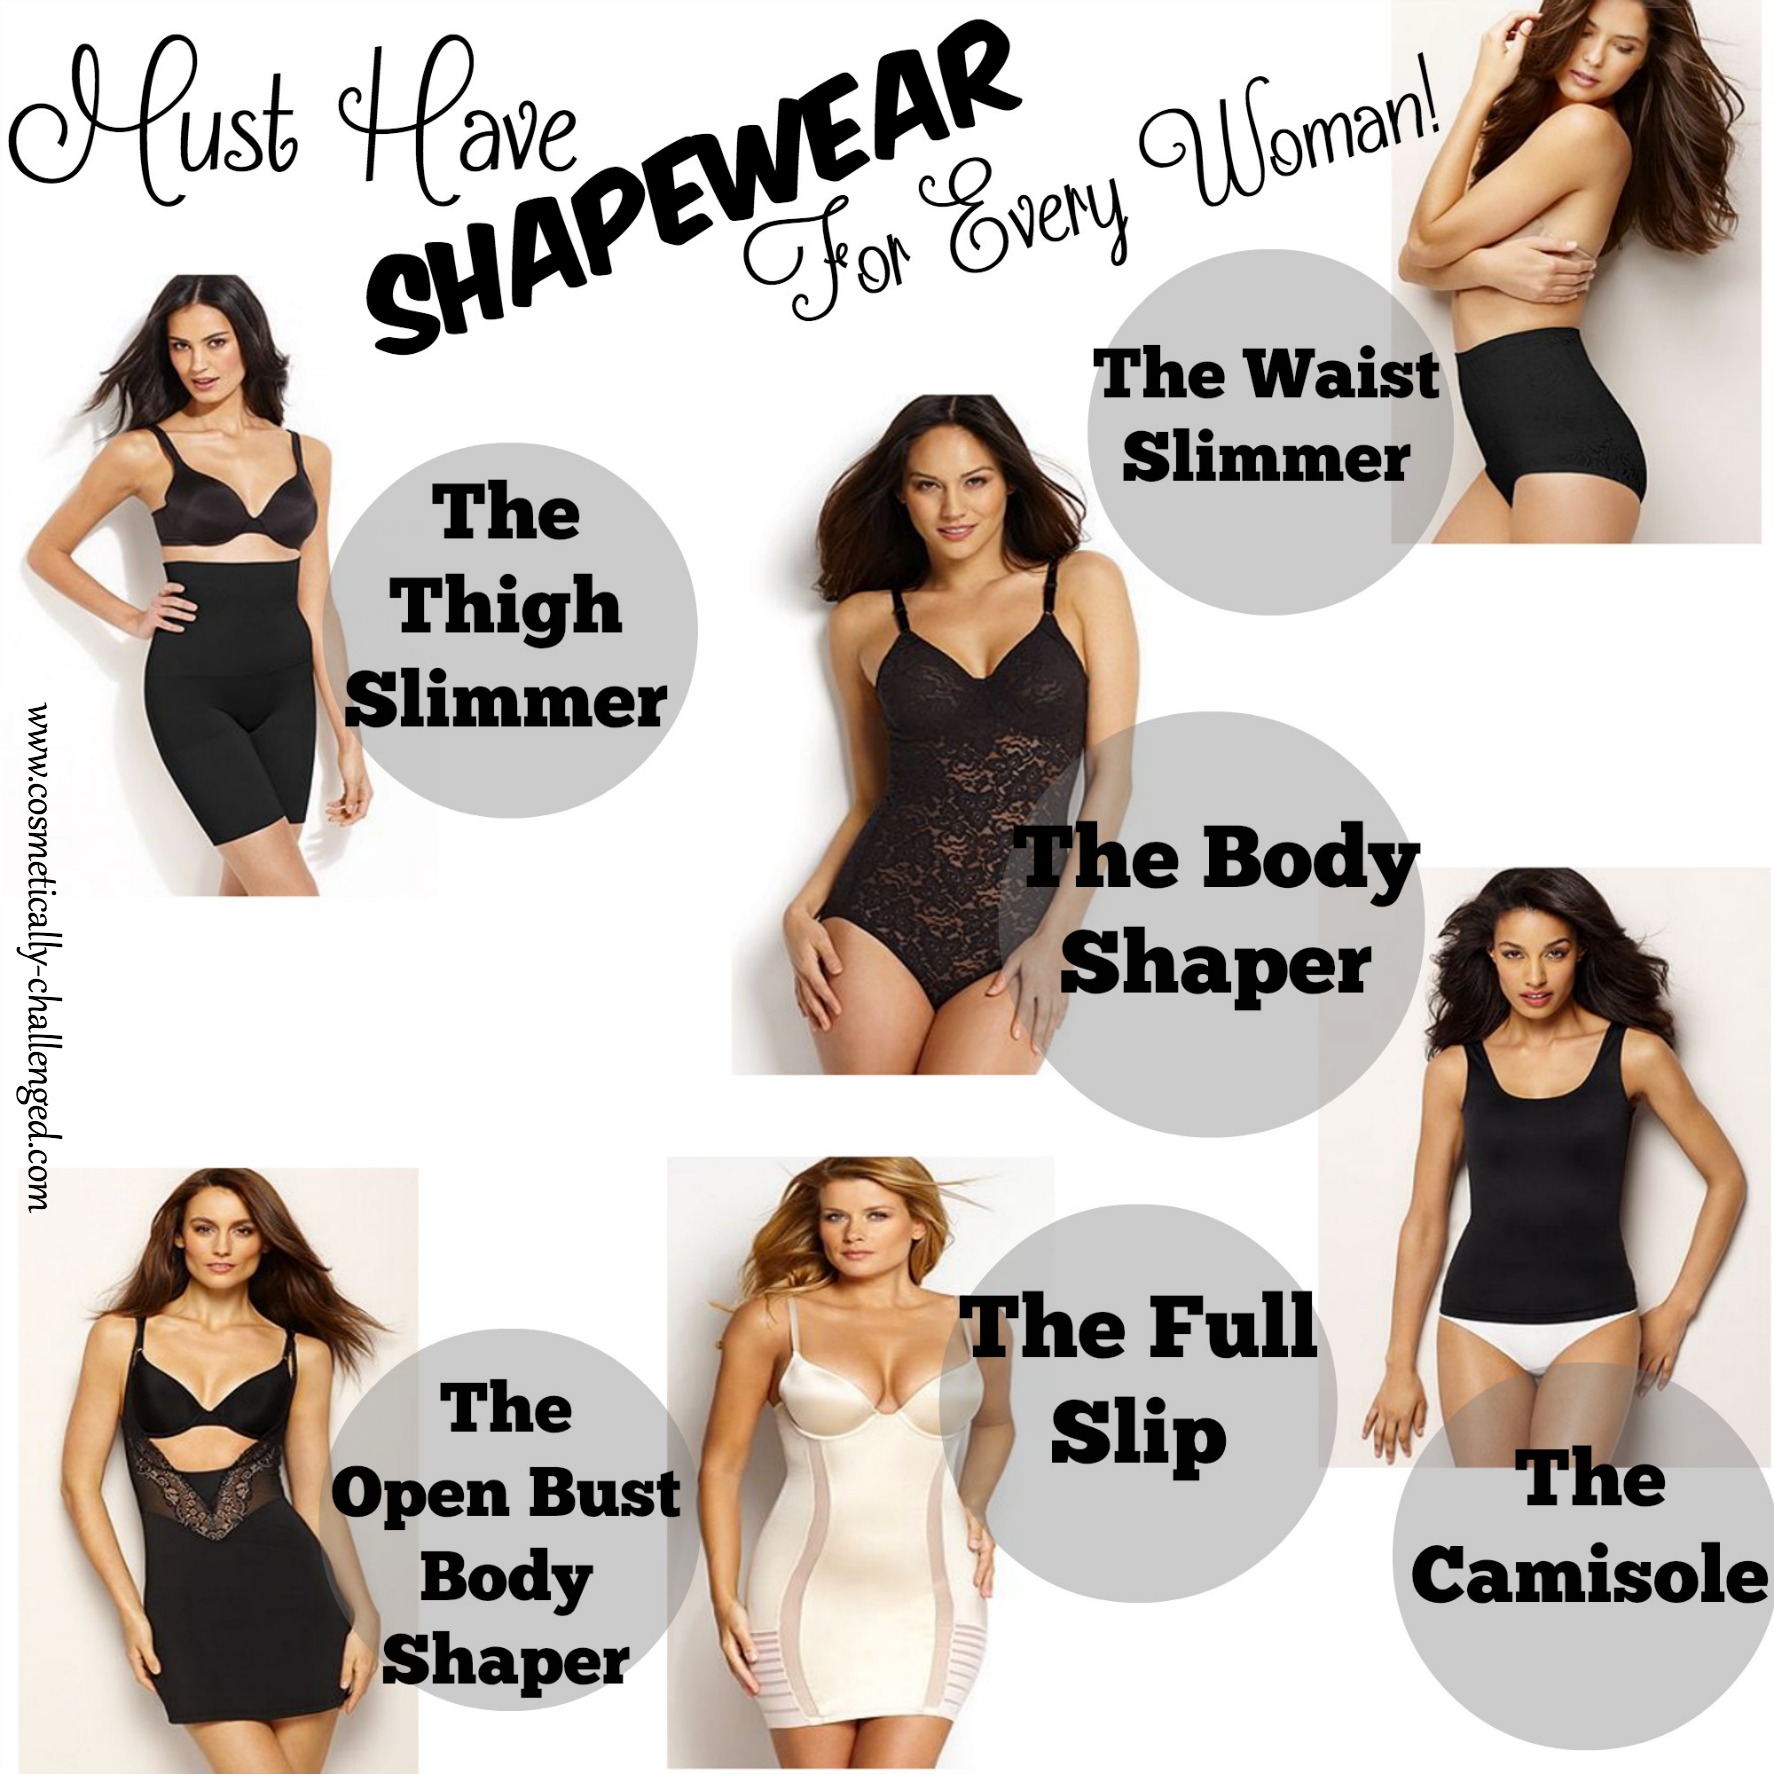 How a Spanx Mishap Changed My Perception of My 'Mom Bod